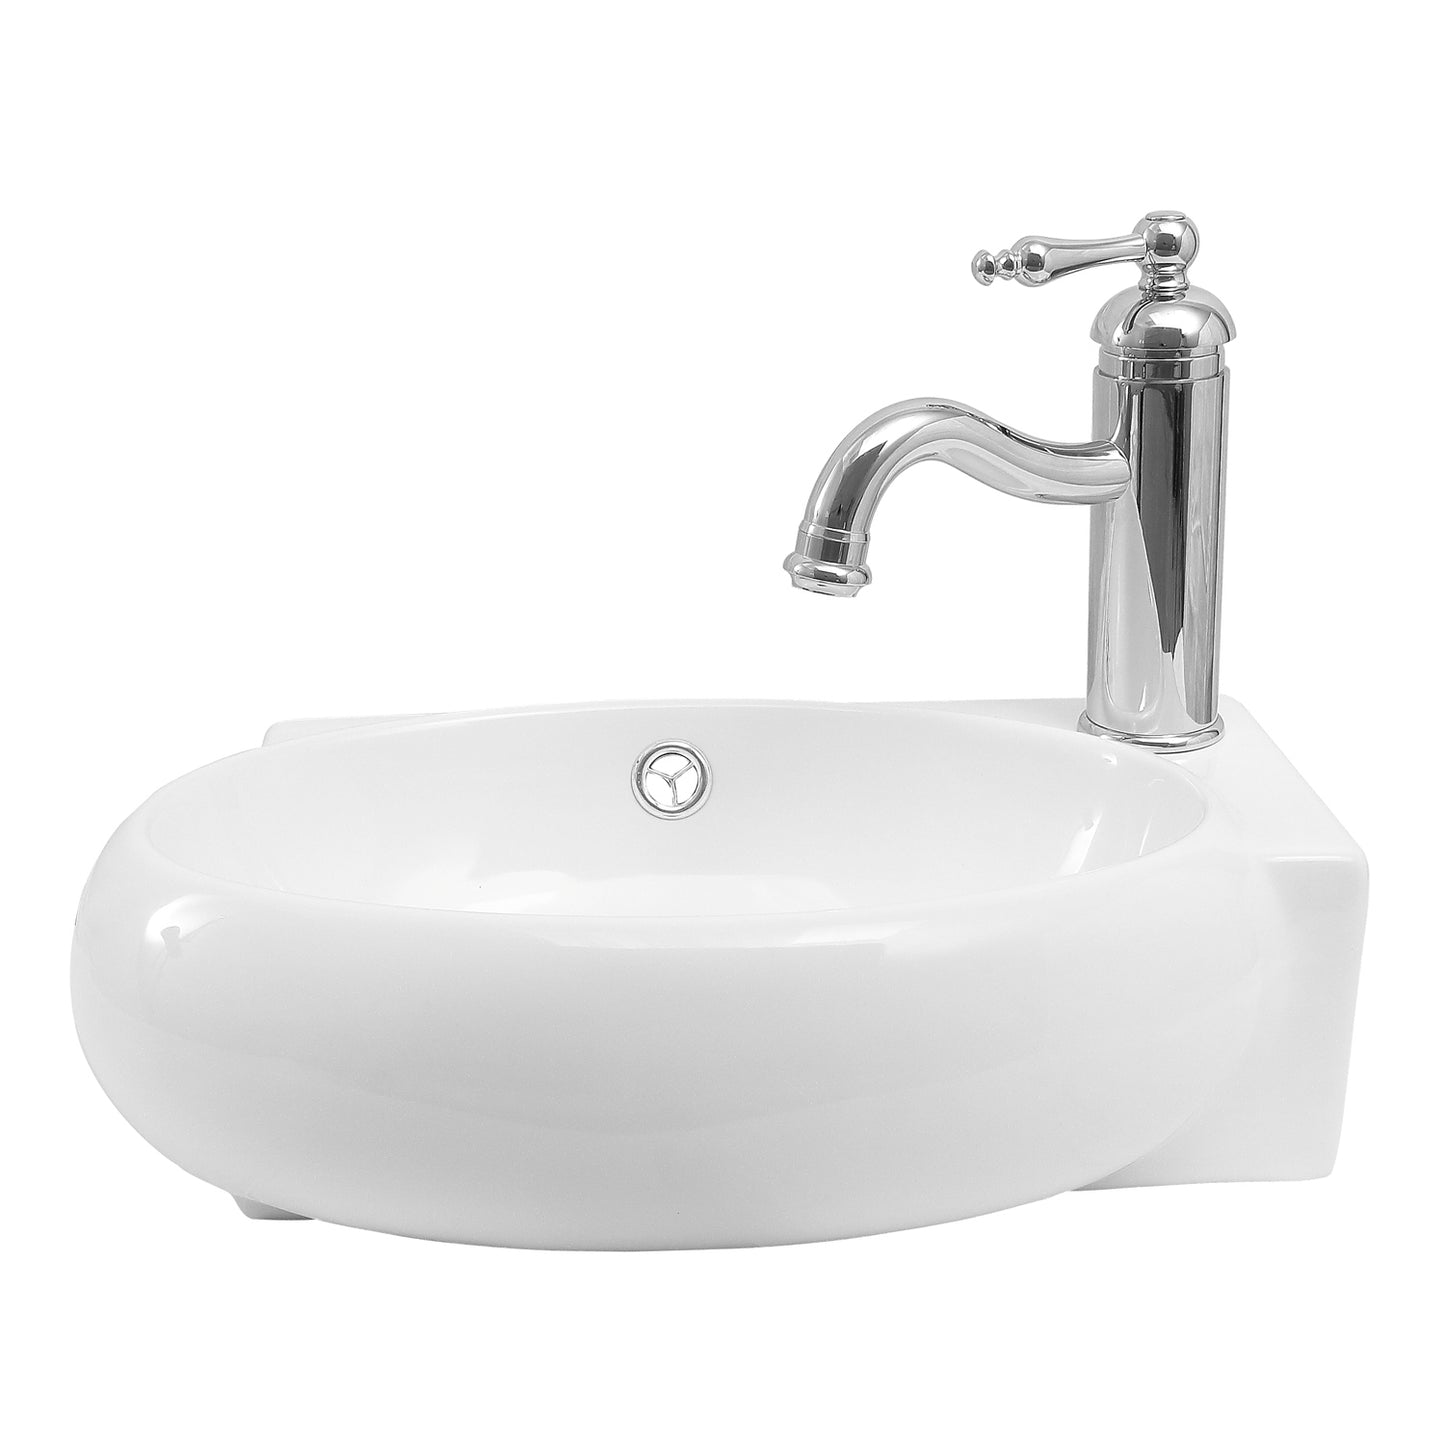 Molly 16" Wall Hung Bathroom Sink White 1 Faucet Hole